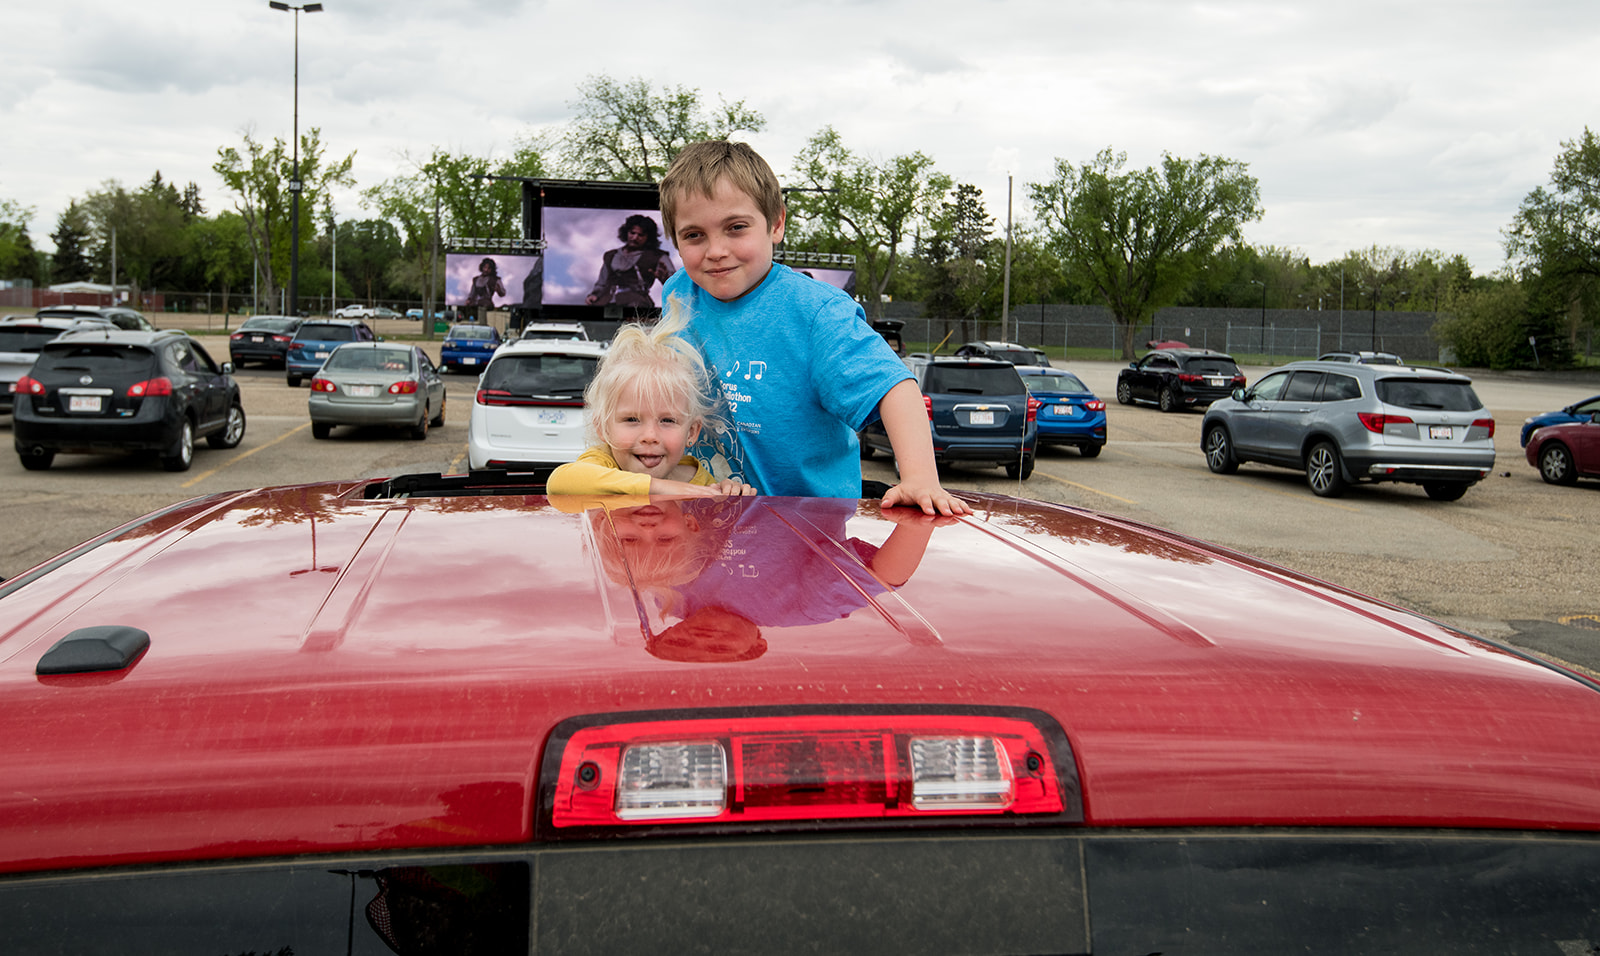 kids peeking out of sunroof in parking lot at outdoor movie event